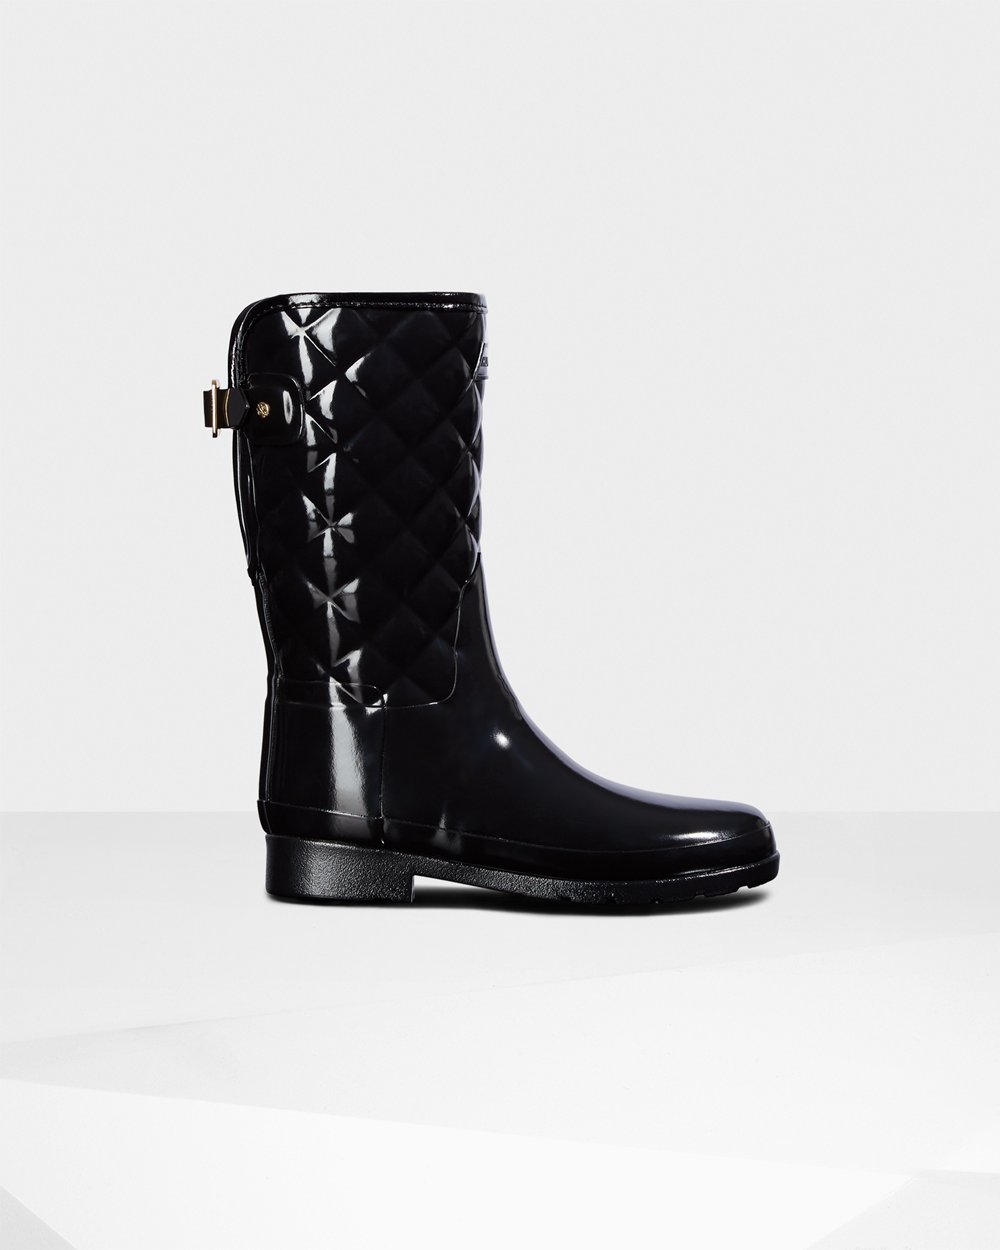 Botas de Lluvia Cortas Hunter Mujer - Refined Slim Fit Adjustable Quilted - Negros - MSDKQLN-57